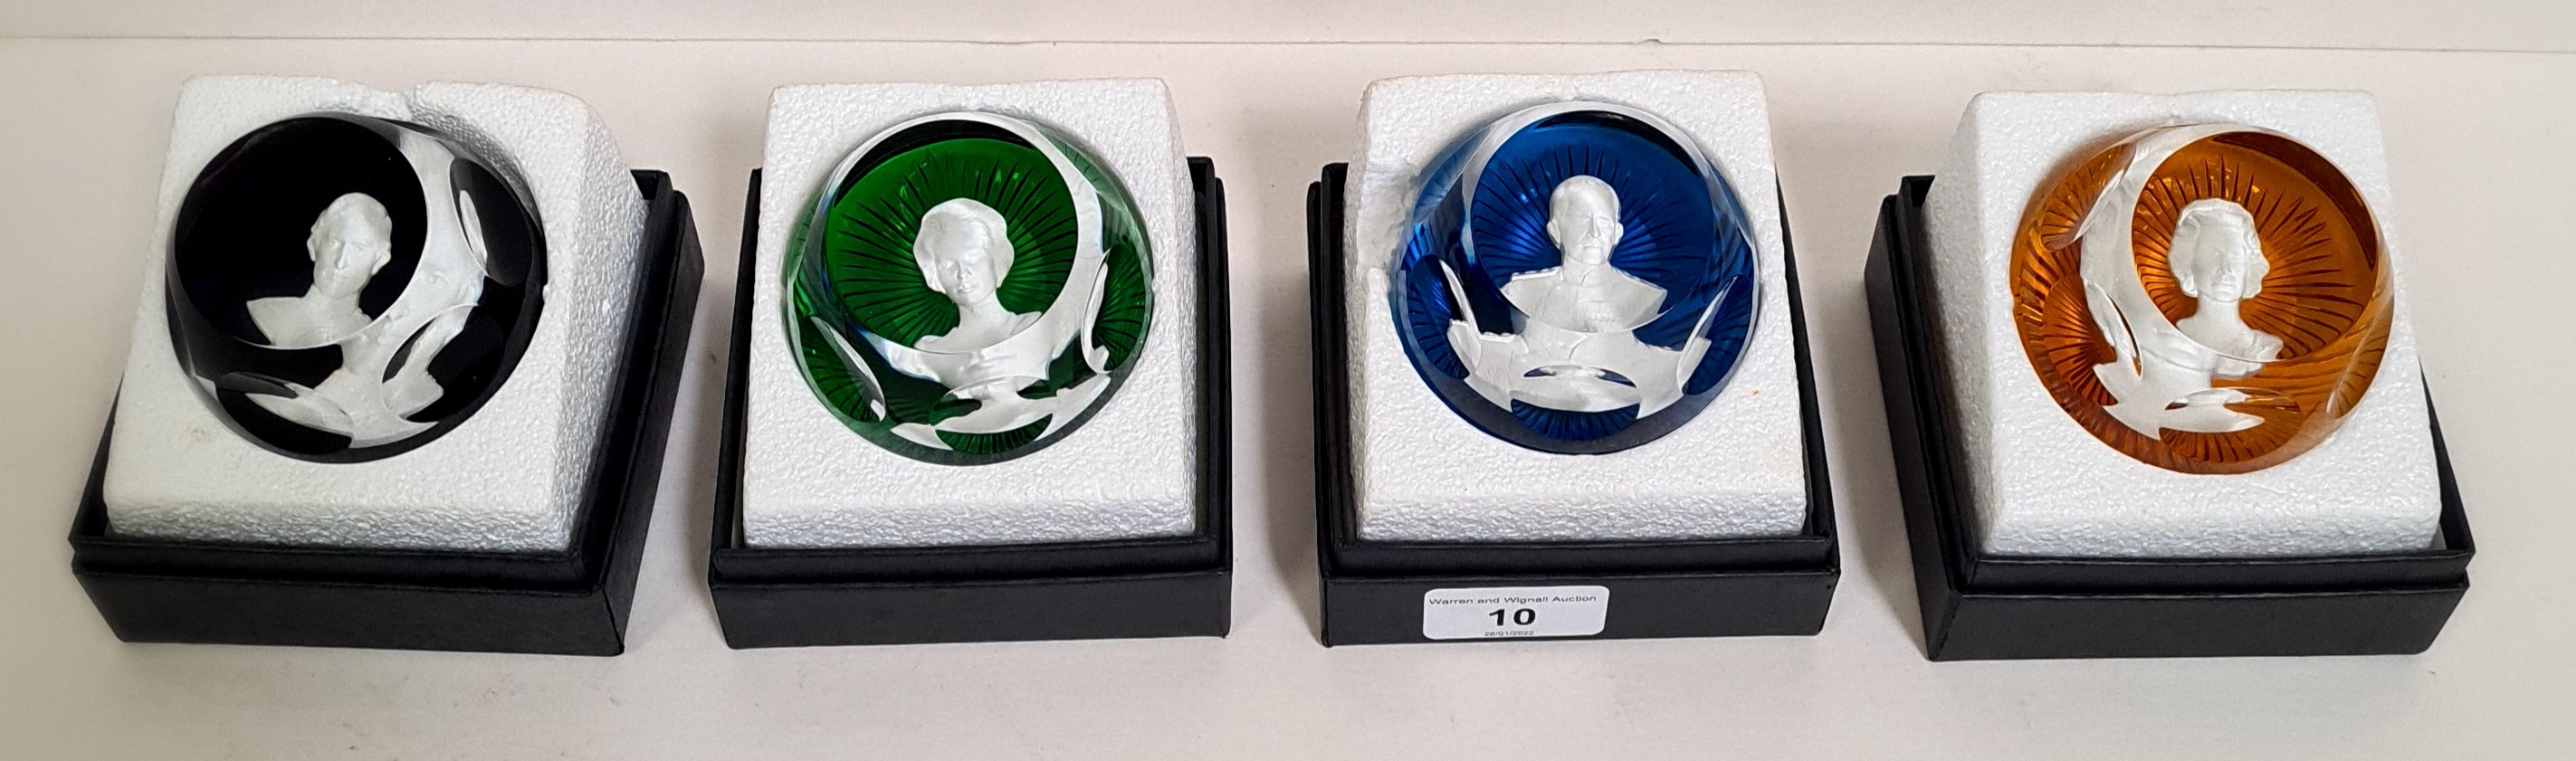 The Royal Cameos in crystal, a collection of 4 crystal paperweights containing cameos designed by